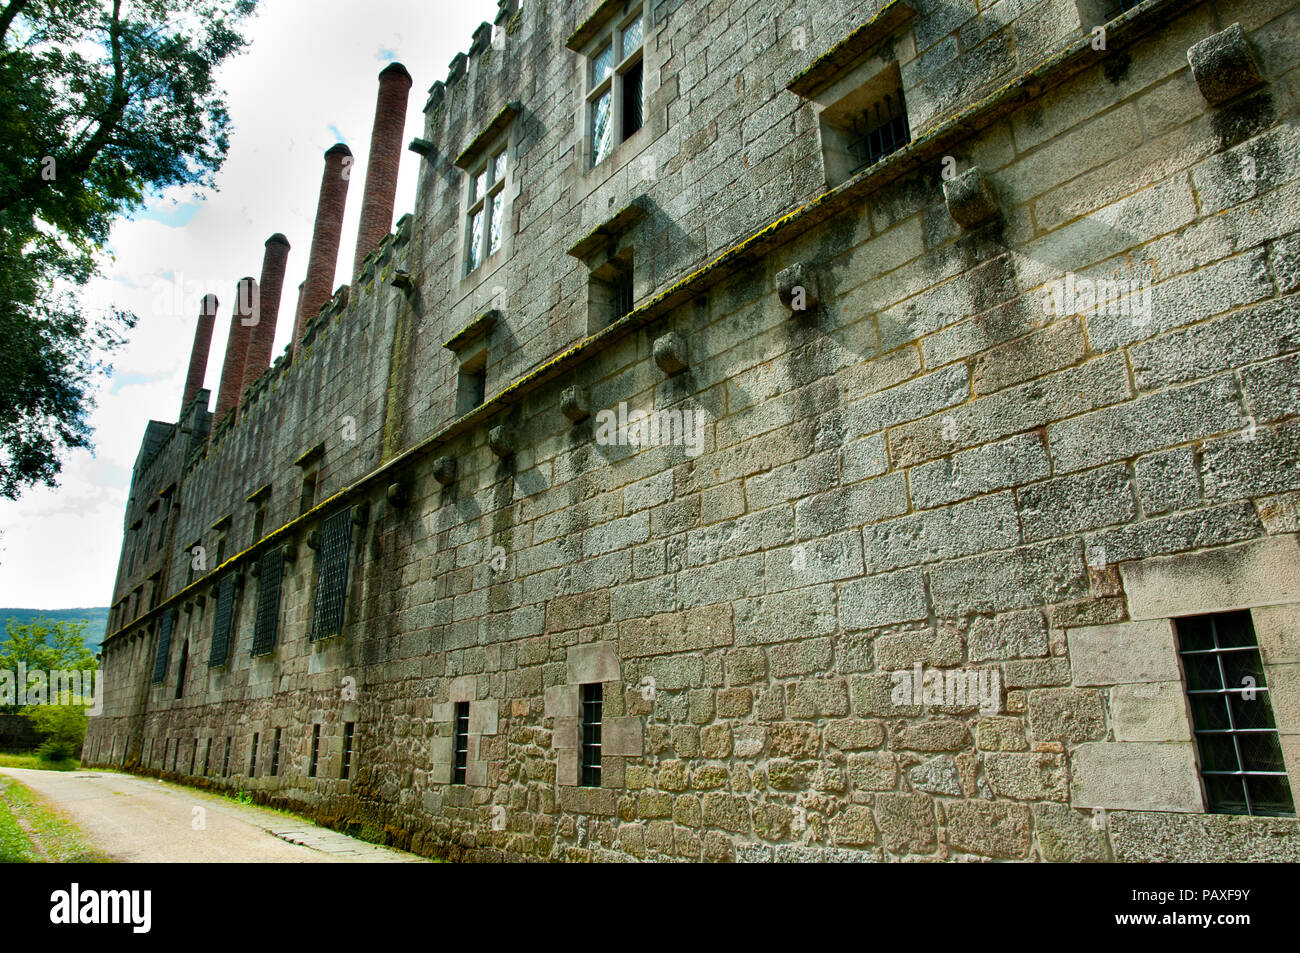 Palace of the Dukes of Braganza - Guimaraes - Portugal Stock Photo